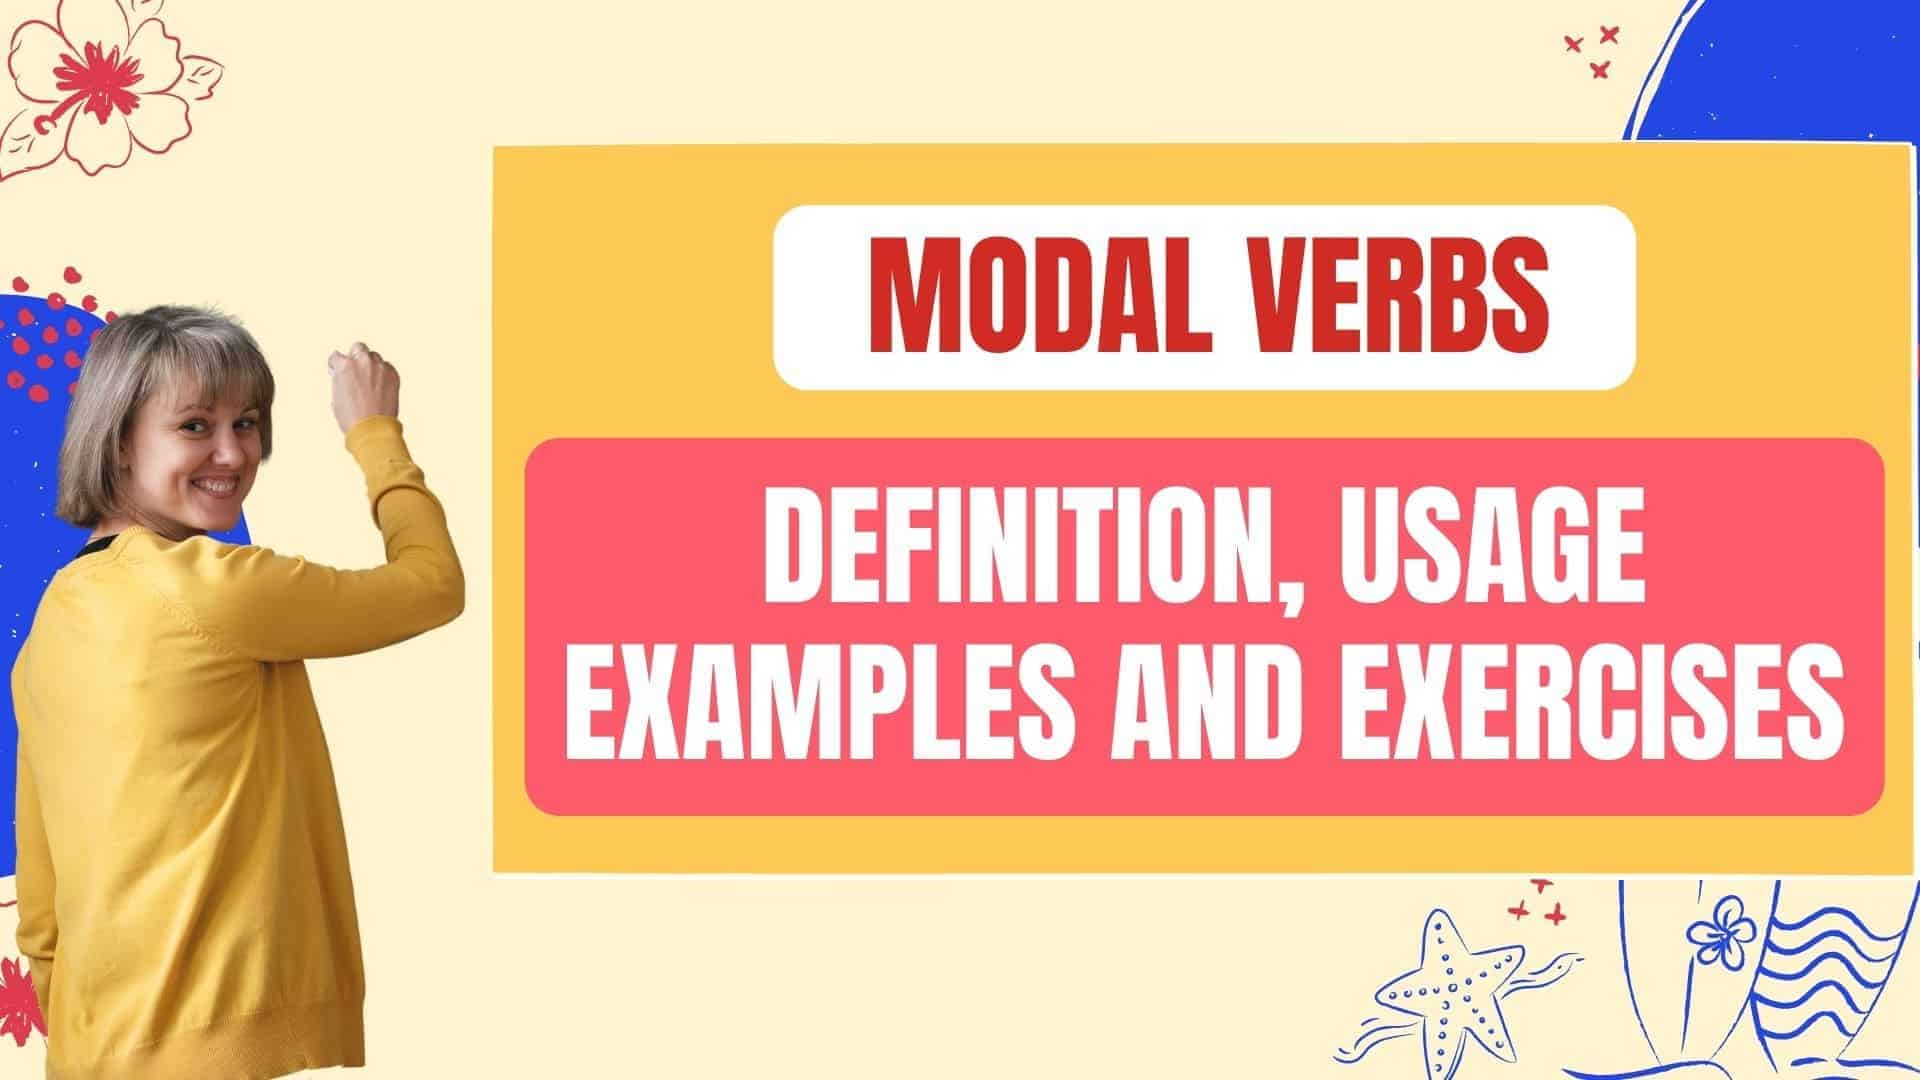 modal-verbs-definition-usage-examples-and-exercises-englishtivi